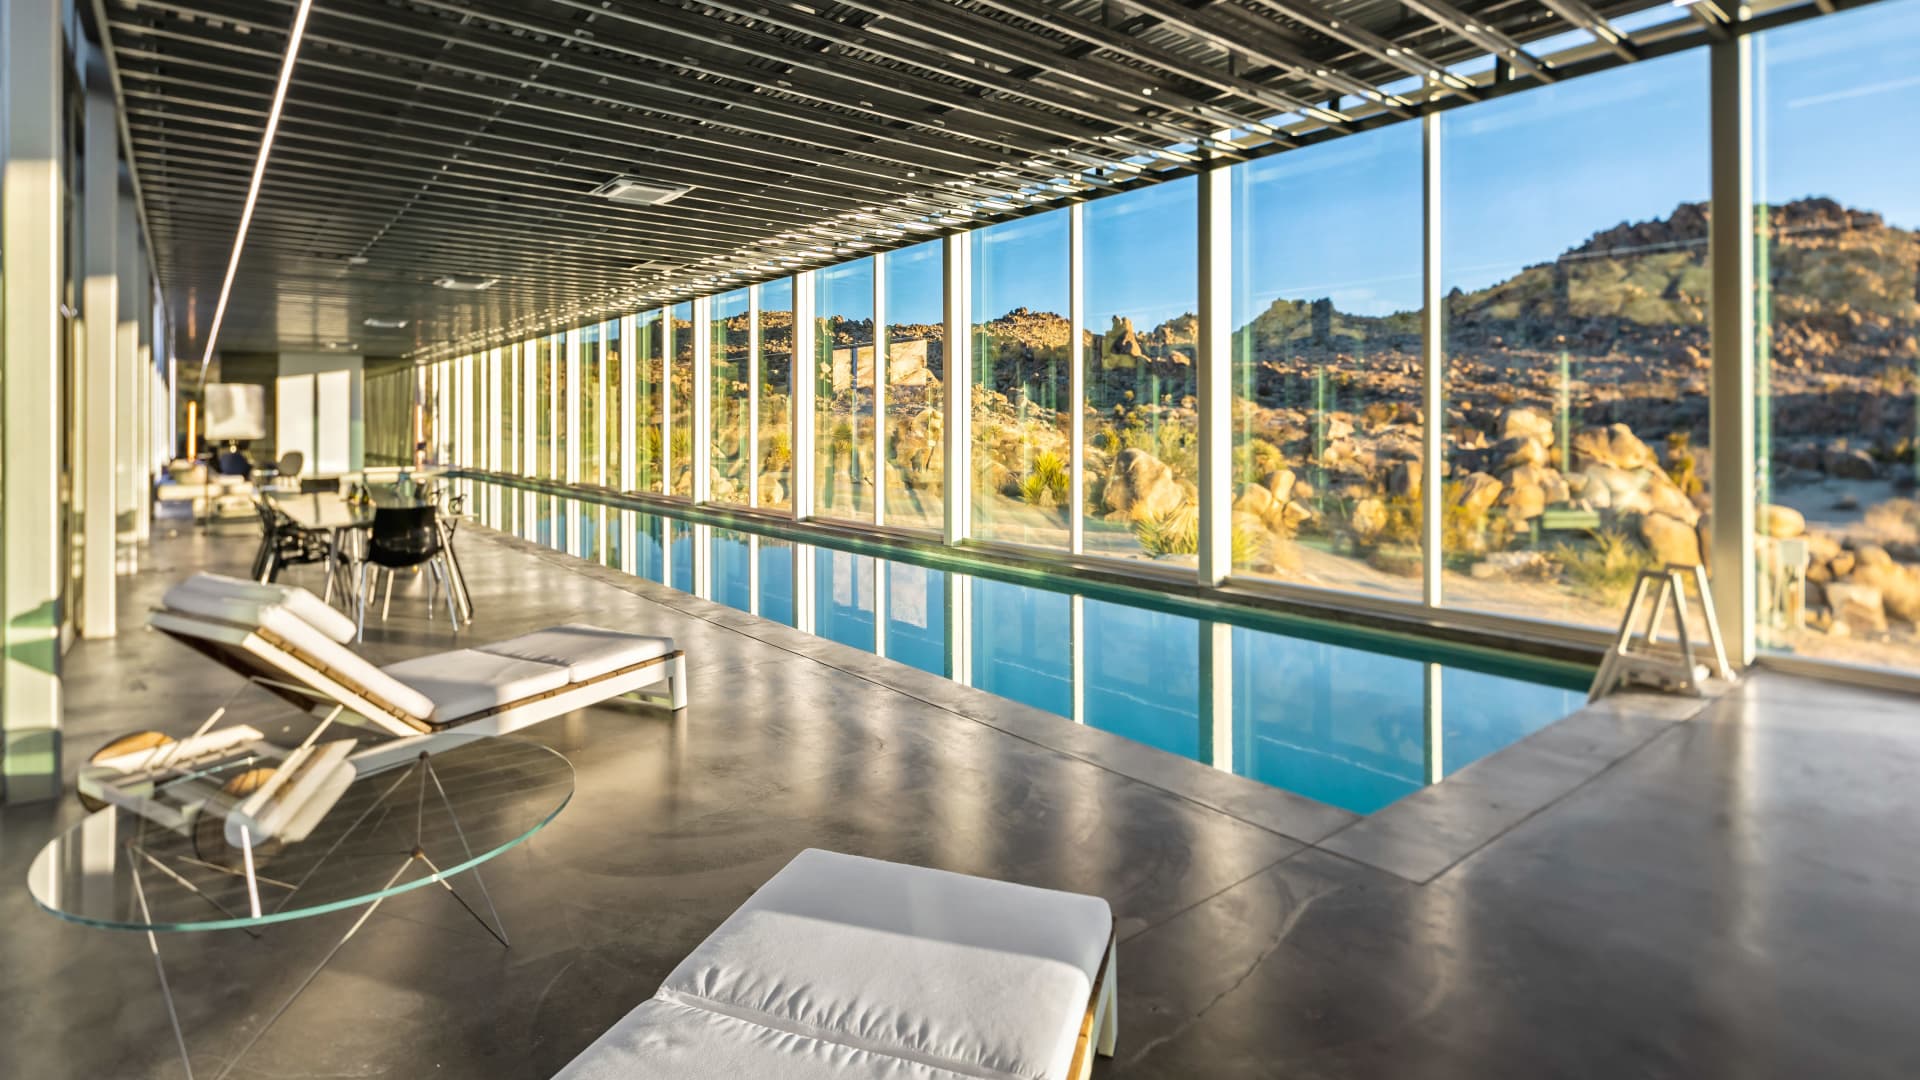 A view of the indoor pool and the panoramic views framed by floor-to-ceiling panels of glass.